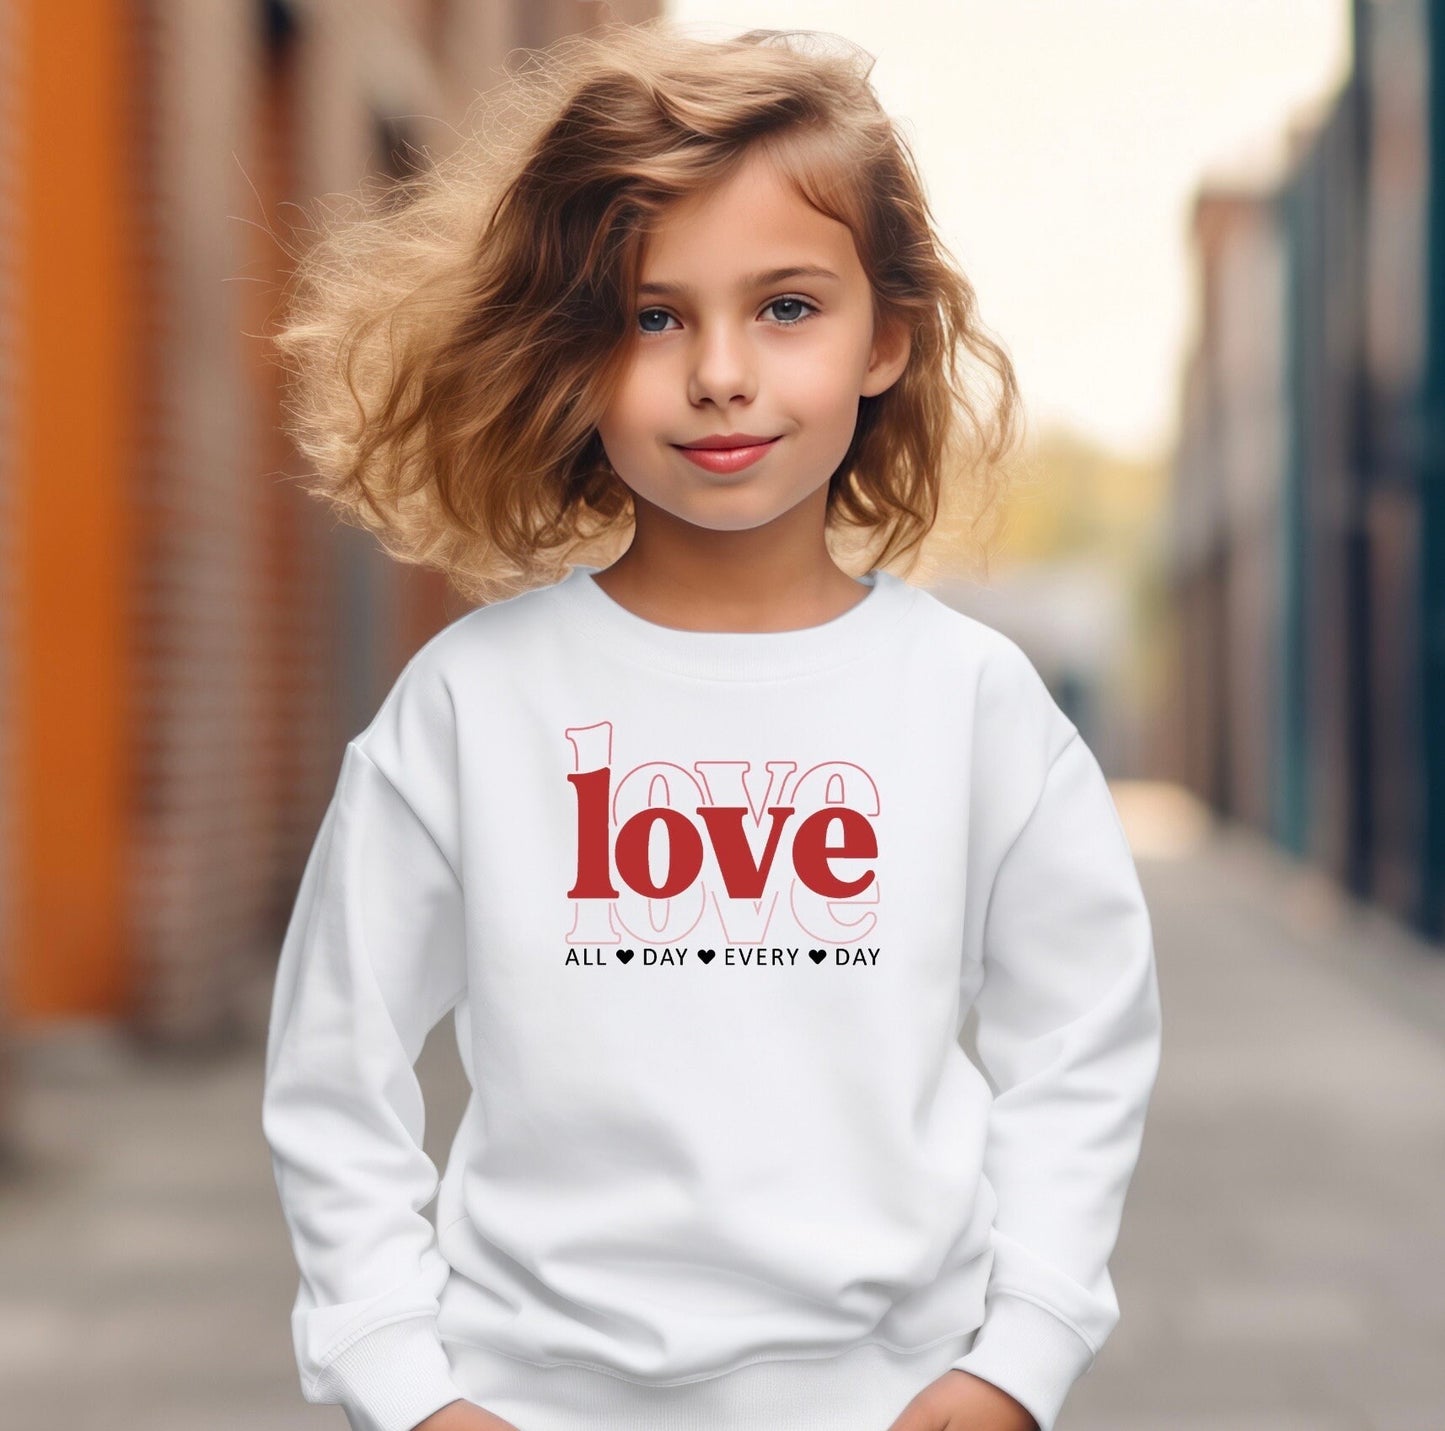 Kids Love Hoodie , Youth Love Sweatshirt, Toddler Love Sweater, Girl Valentine Crewneck, Gift For Daughter, Matching sweaters, Infant Shirt